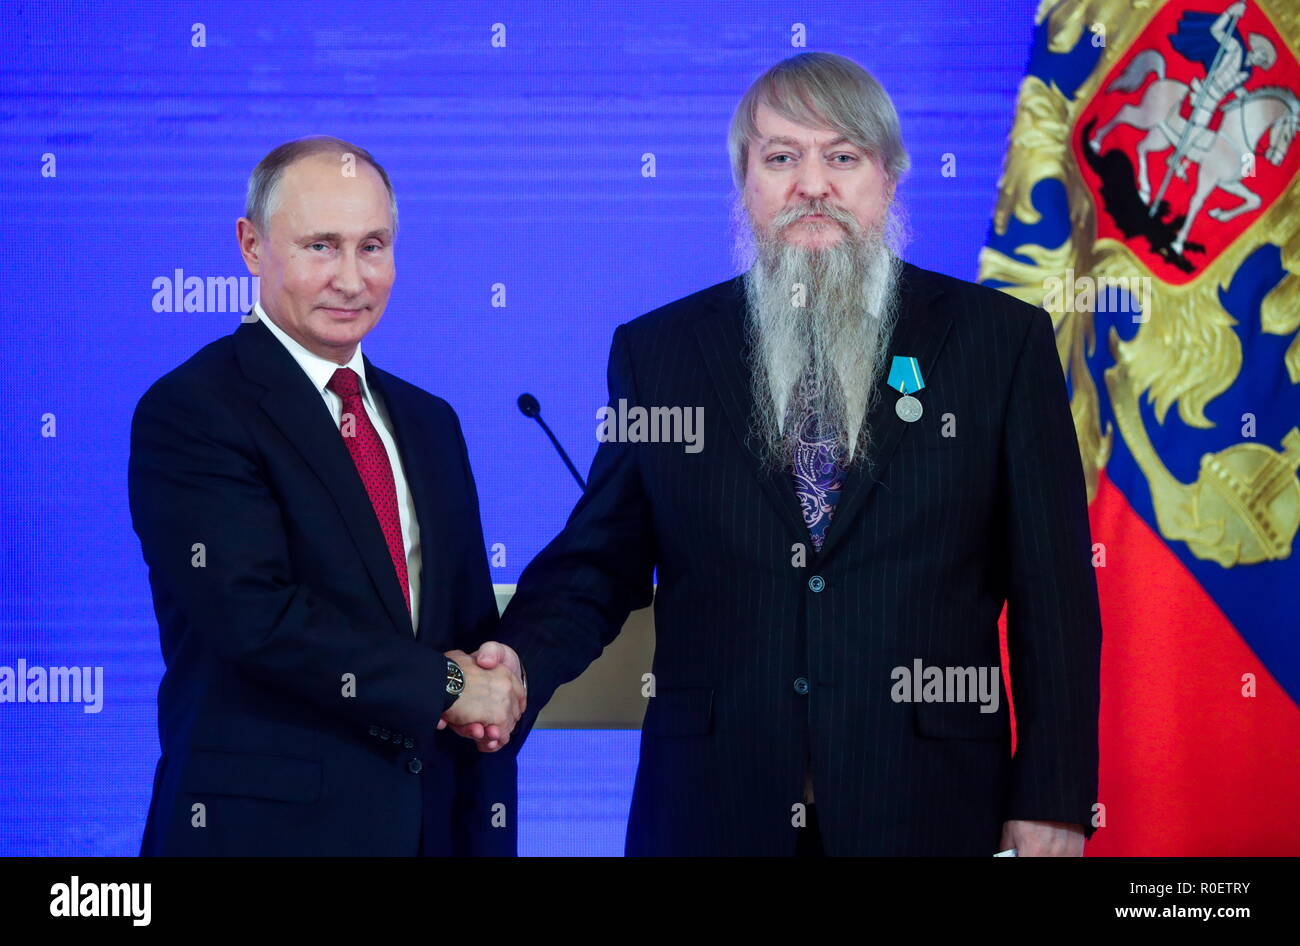 Sergei Provatorov, chairman of board of the all-Ukrainian union of public  organisations, Russkoye Sodruzhestvo (R), receives a Pushkin Medal from the President  of Russia Vladimir Putin at a ceremony to award foreign